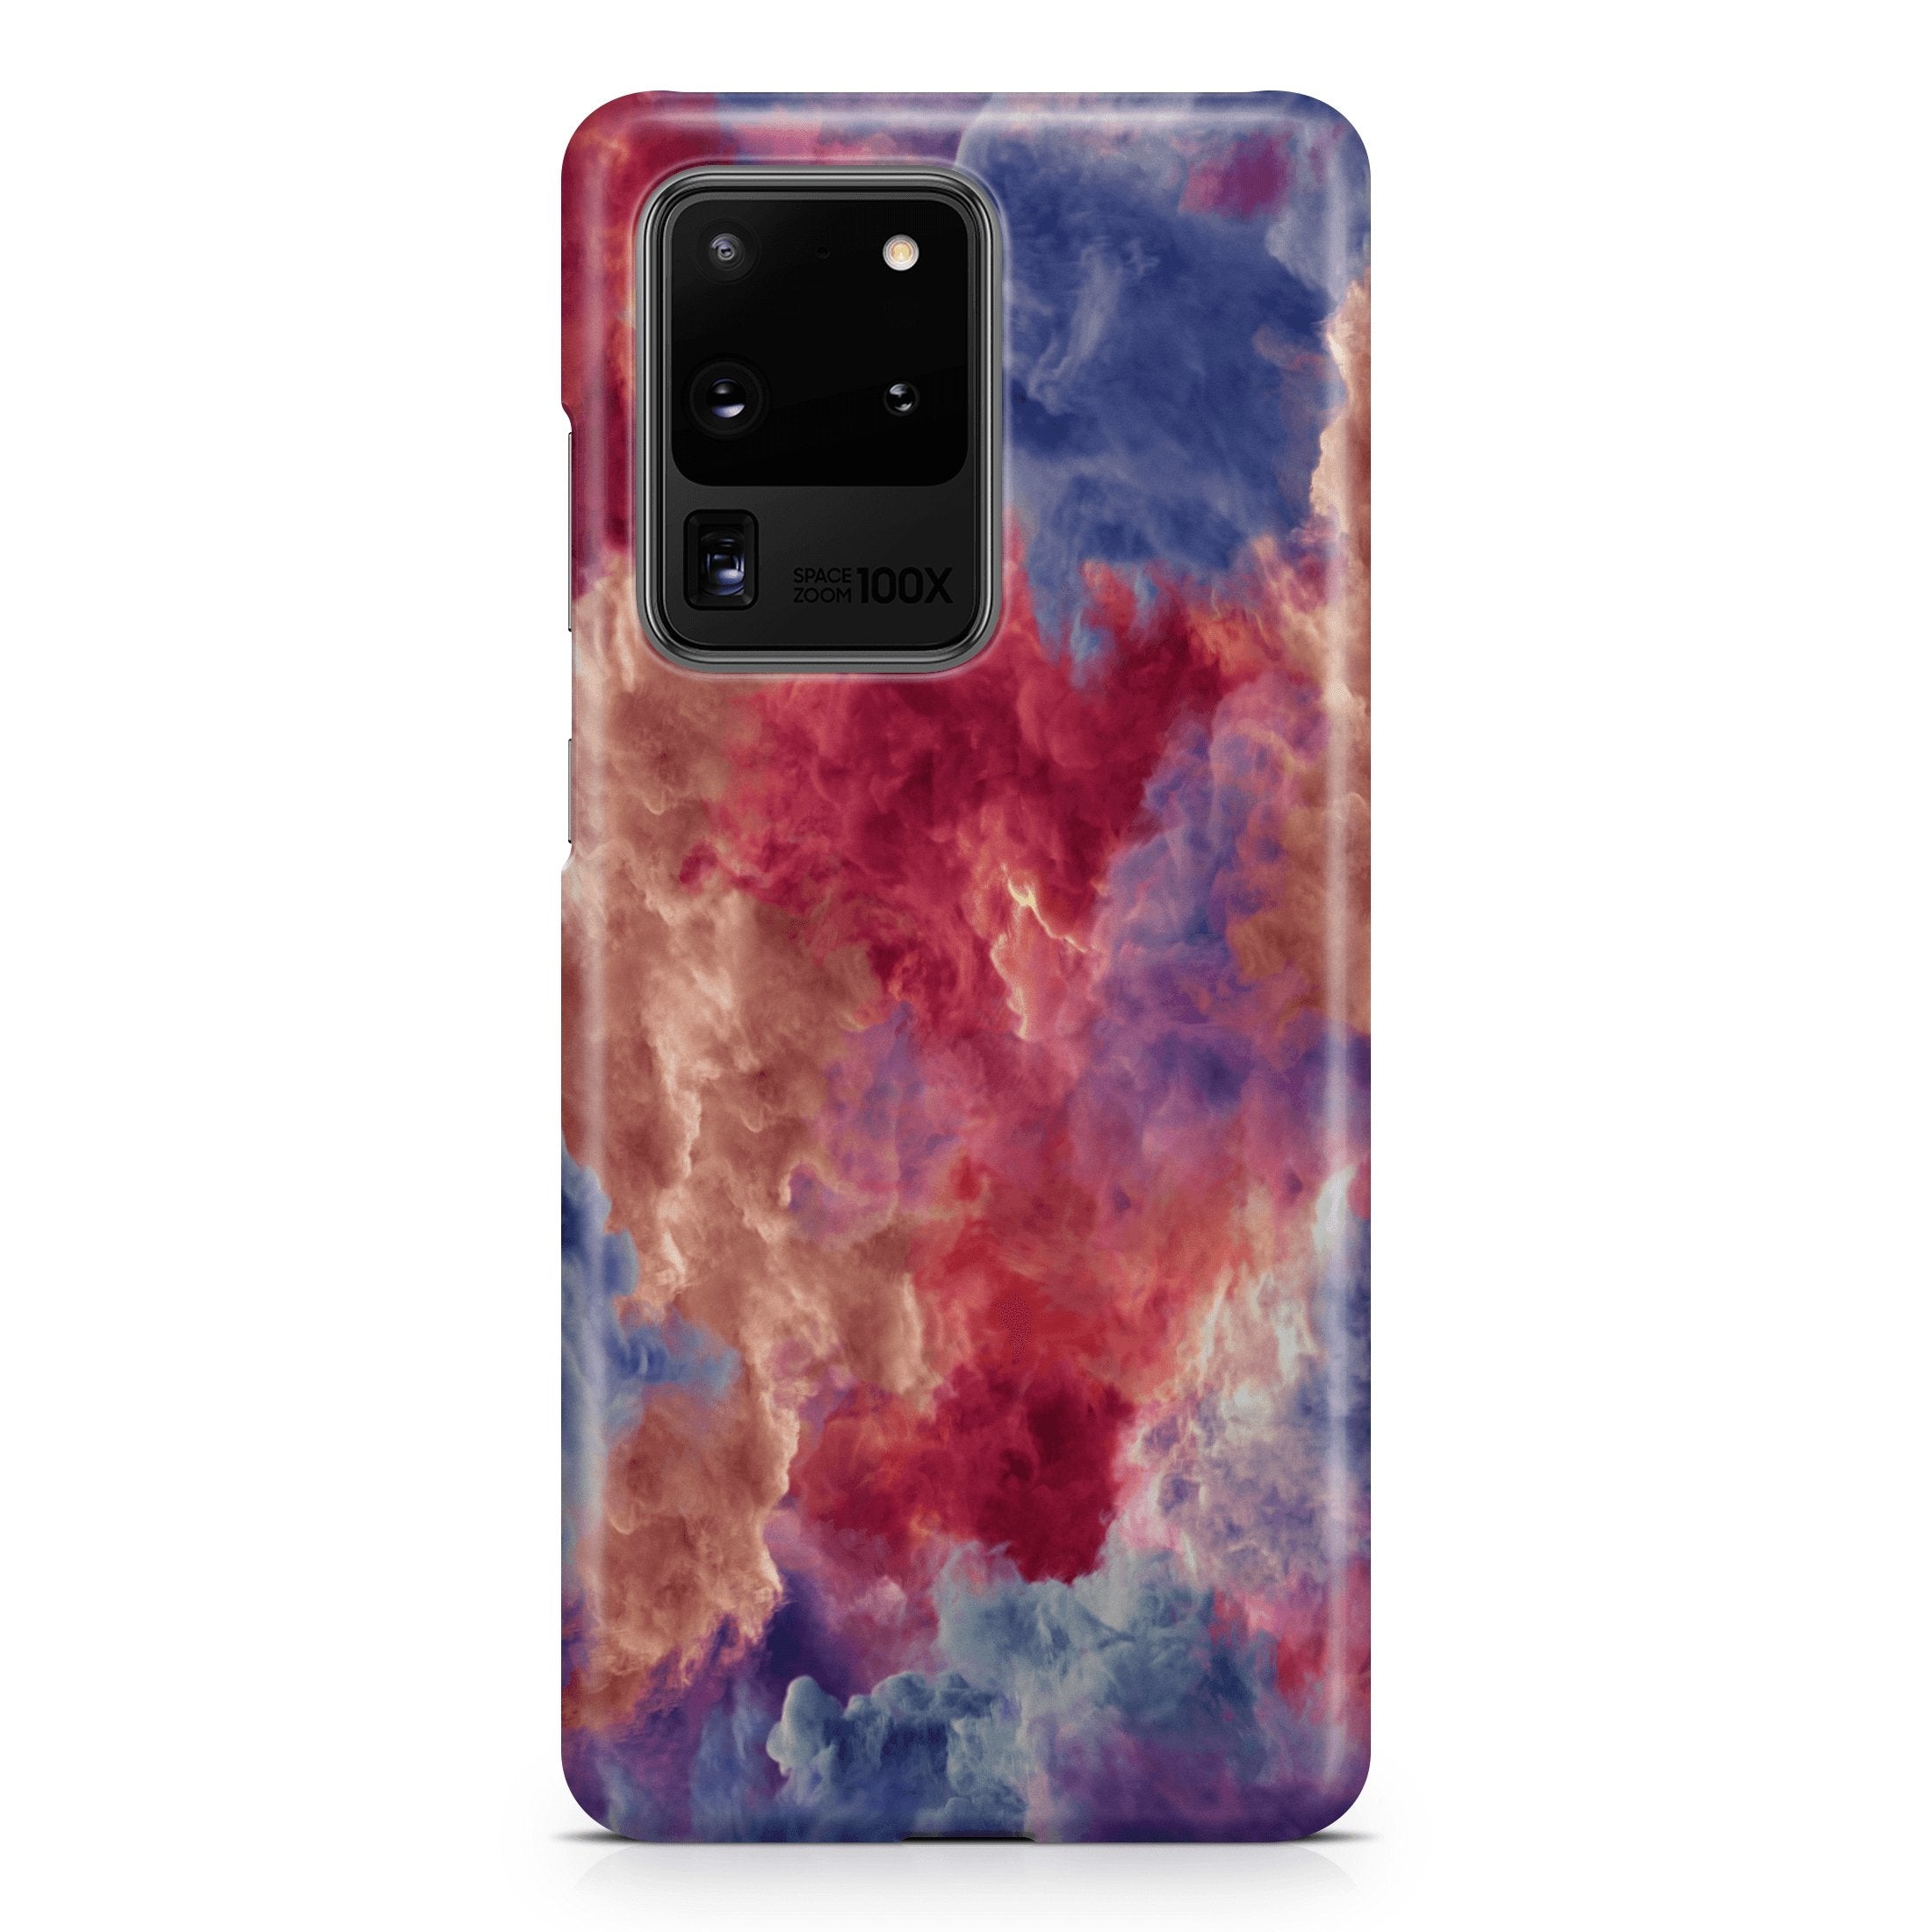 Red & Blue Smoke Cloud - Samsung phone case designs by CaseSwagger